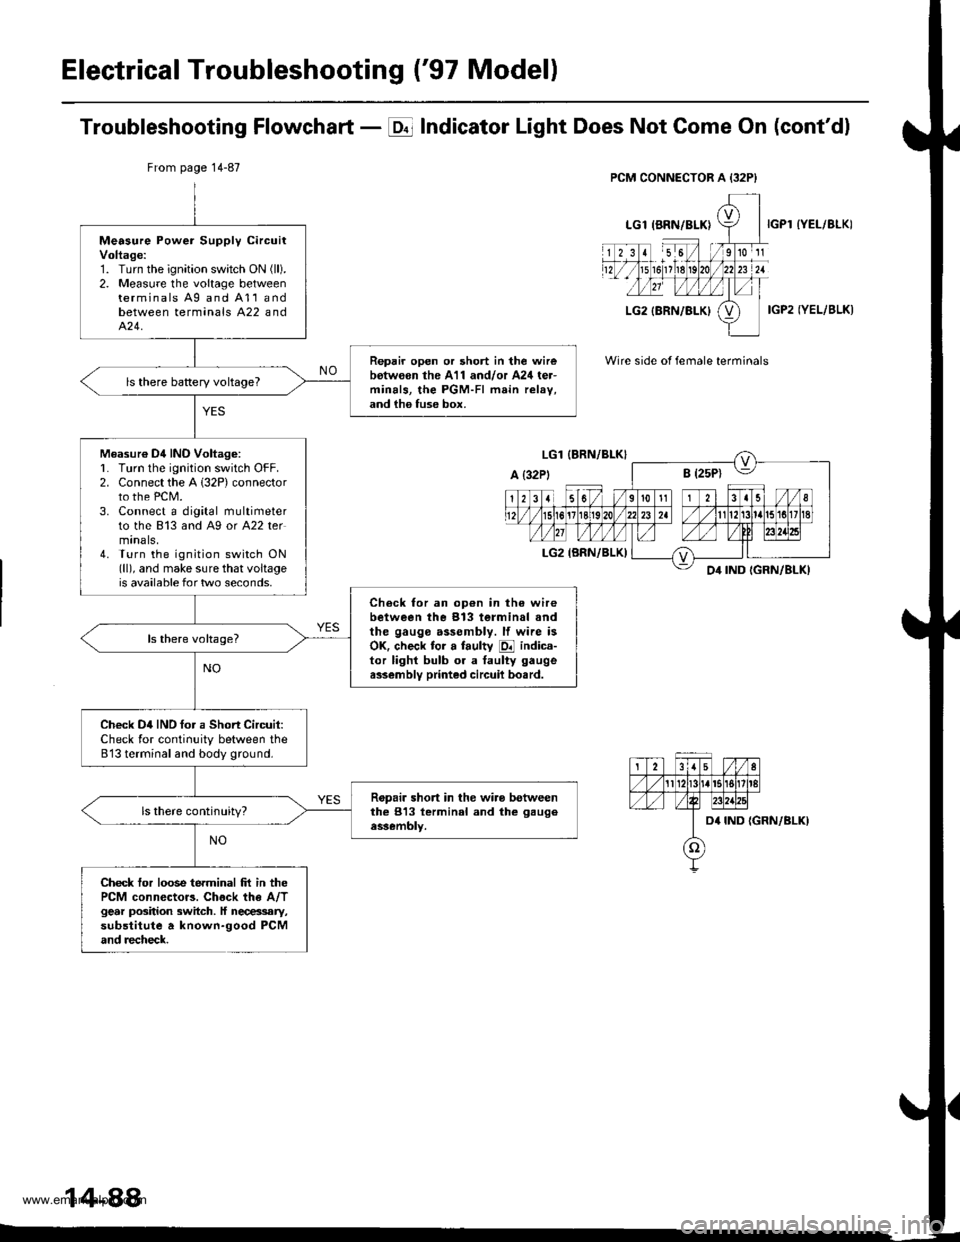 HONDA CR-V 2000 RD1-RD3 / 1.G Workshop Manual 
Electrical Troubleshooting (97 Modell
Troubleshooting Flowchart - E Indicator Light Does Not Gome On (contdl
IYEL/BLK)
IGP2 IYEL/BLK)
Wire side of female terminals
From page 14-87
Measure Power Sup